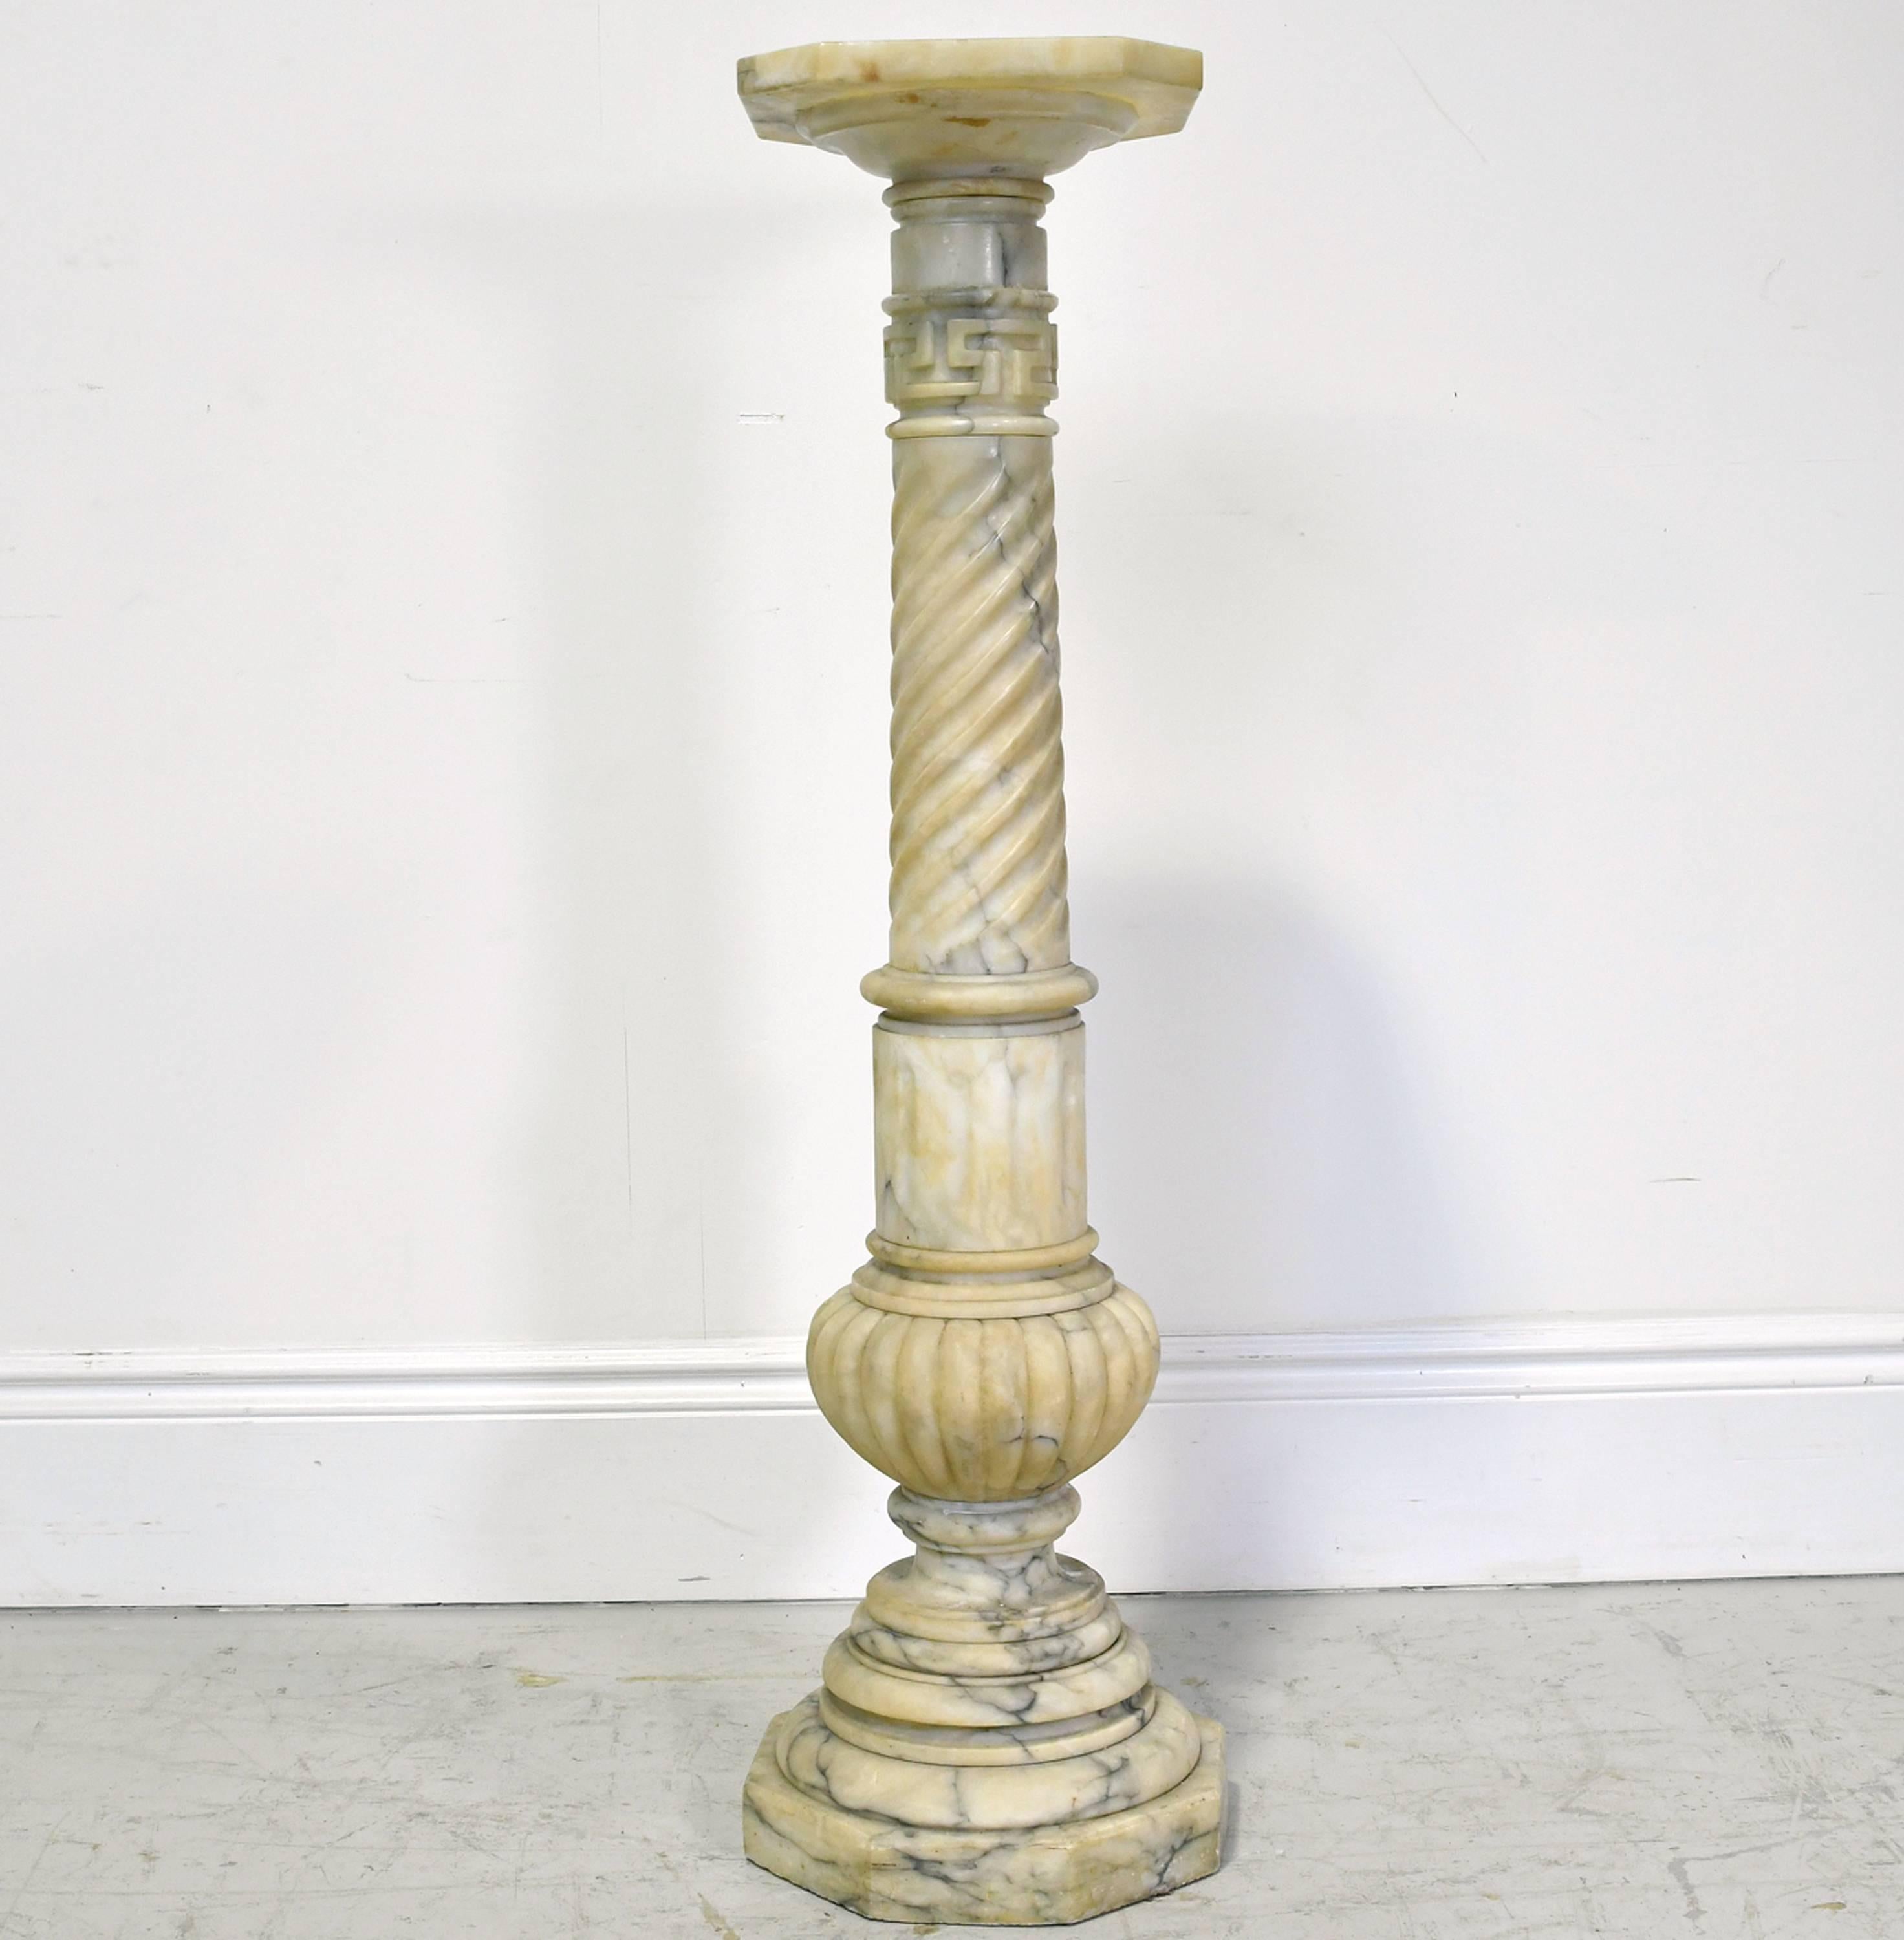 A very beautiful second Empire turned and carved alabaster pedestal from the reign of Napoleon III, France, circa 1860. Color is an off-white with yellow shadows and grey veining. Features a carved Greek key at the top of the pedestal.
Top measures: